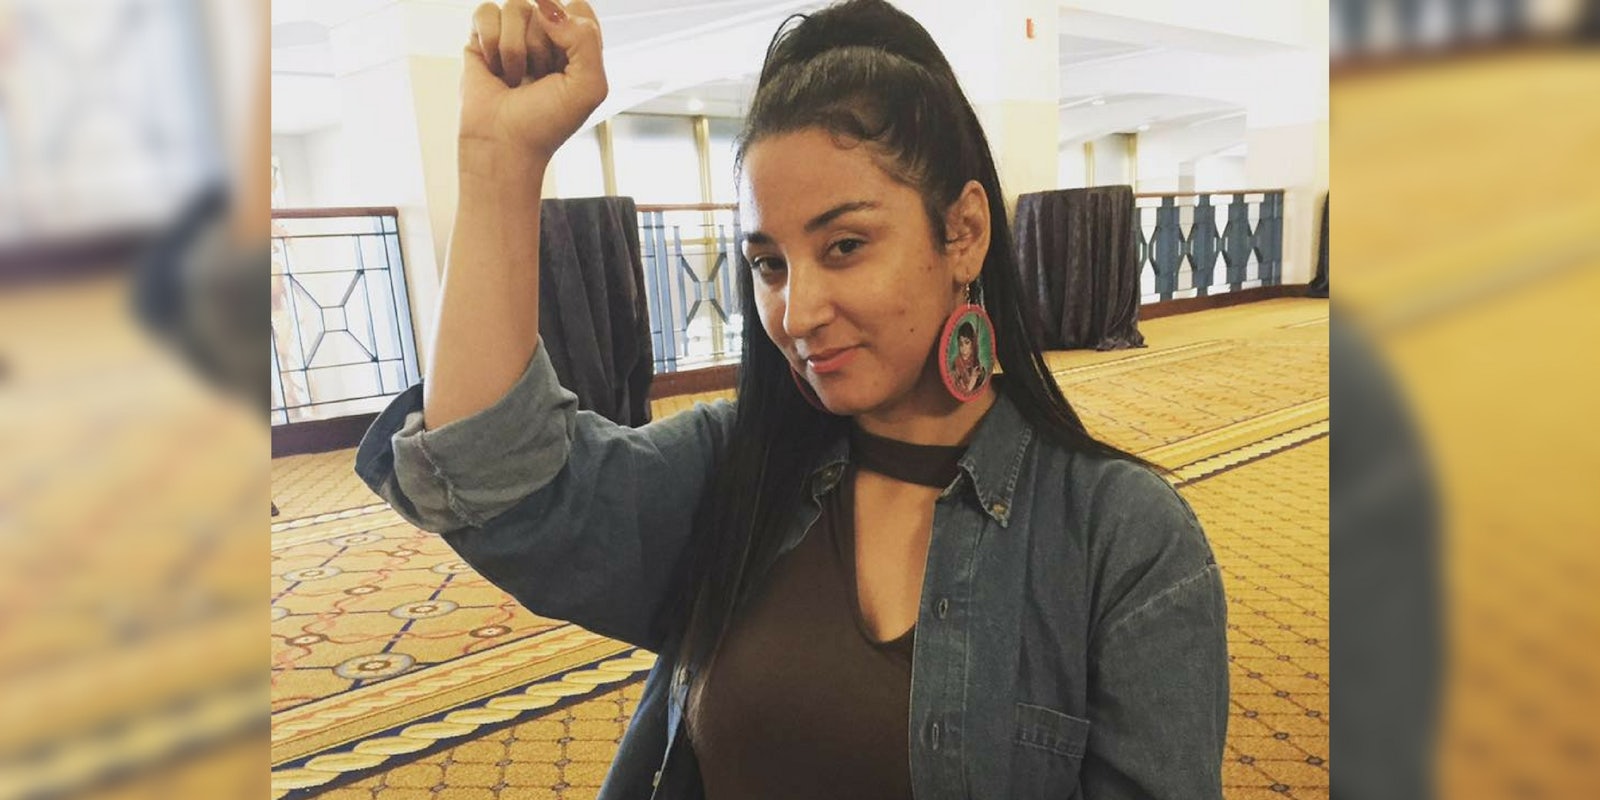 Alejandra Pablos, an abortion rights activist who has been detained by ICE.